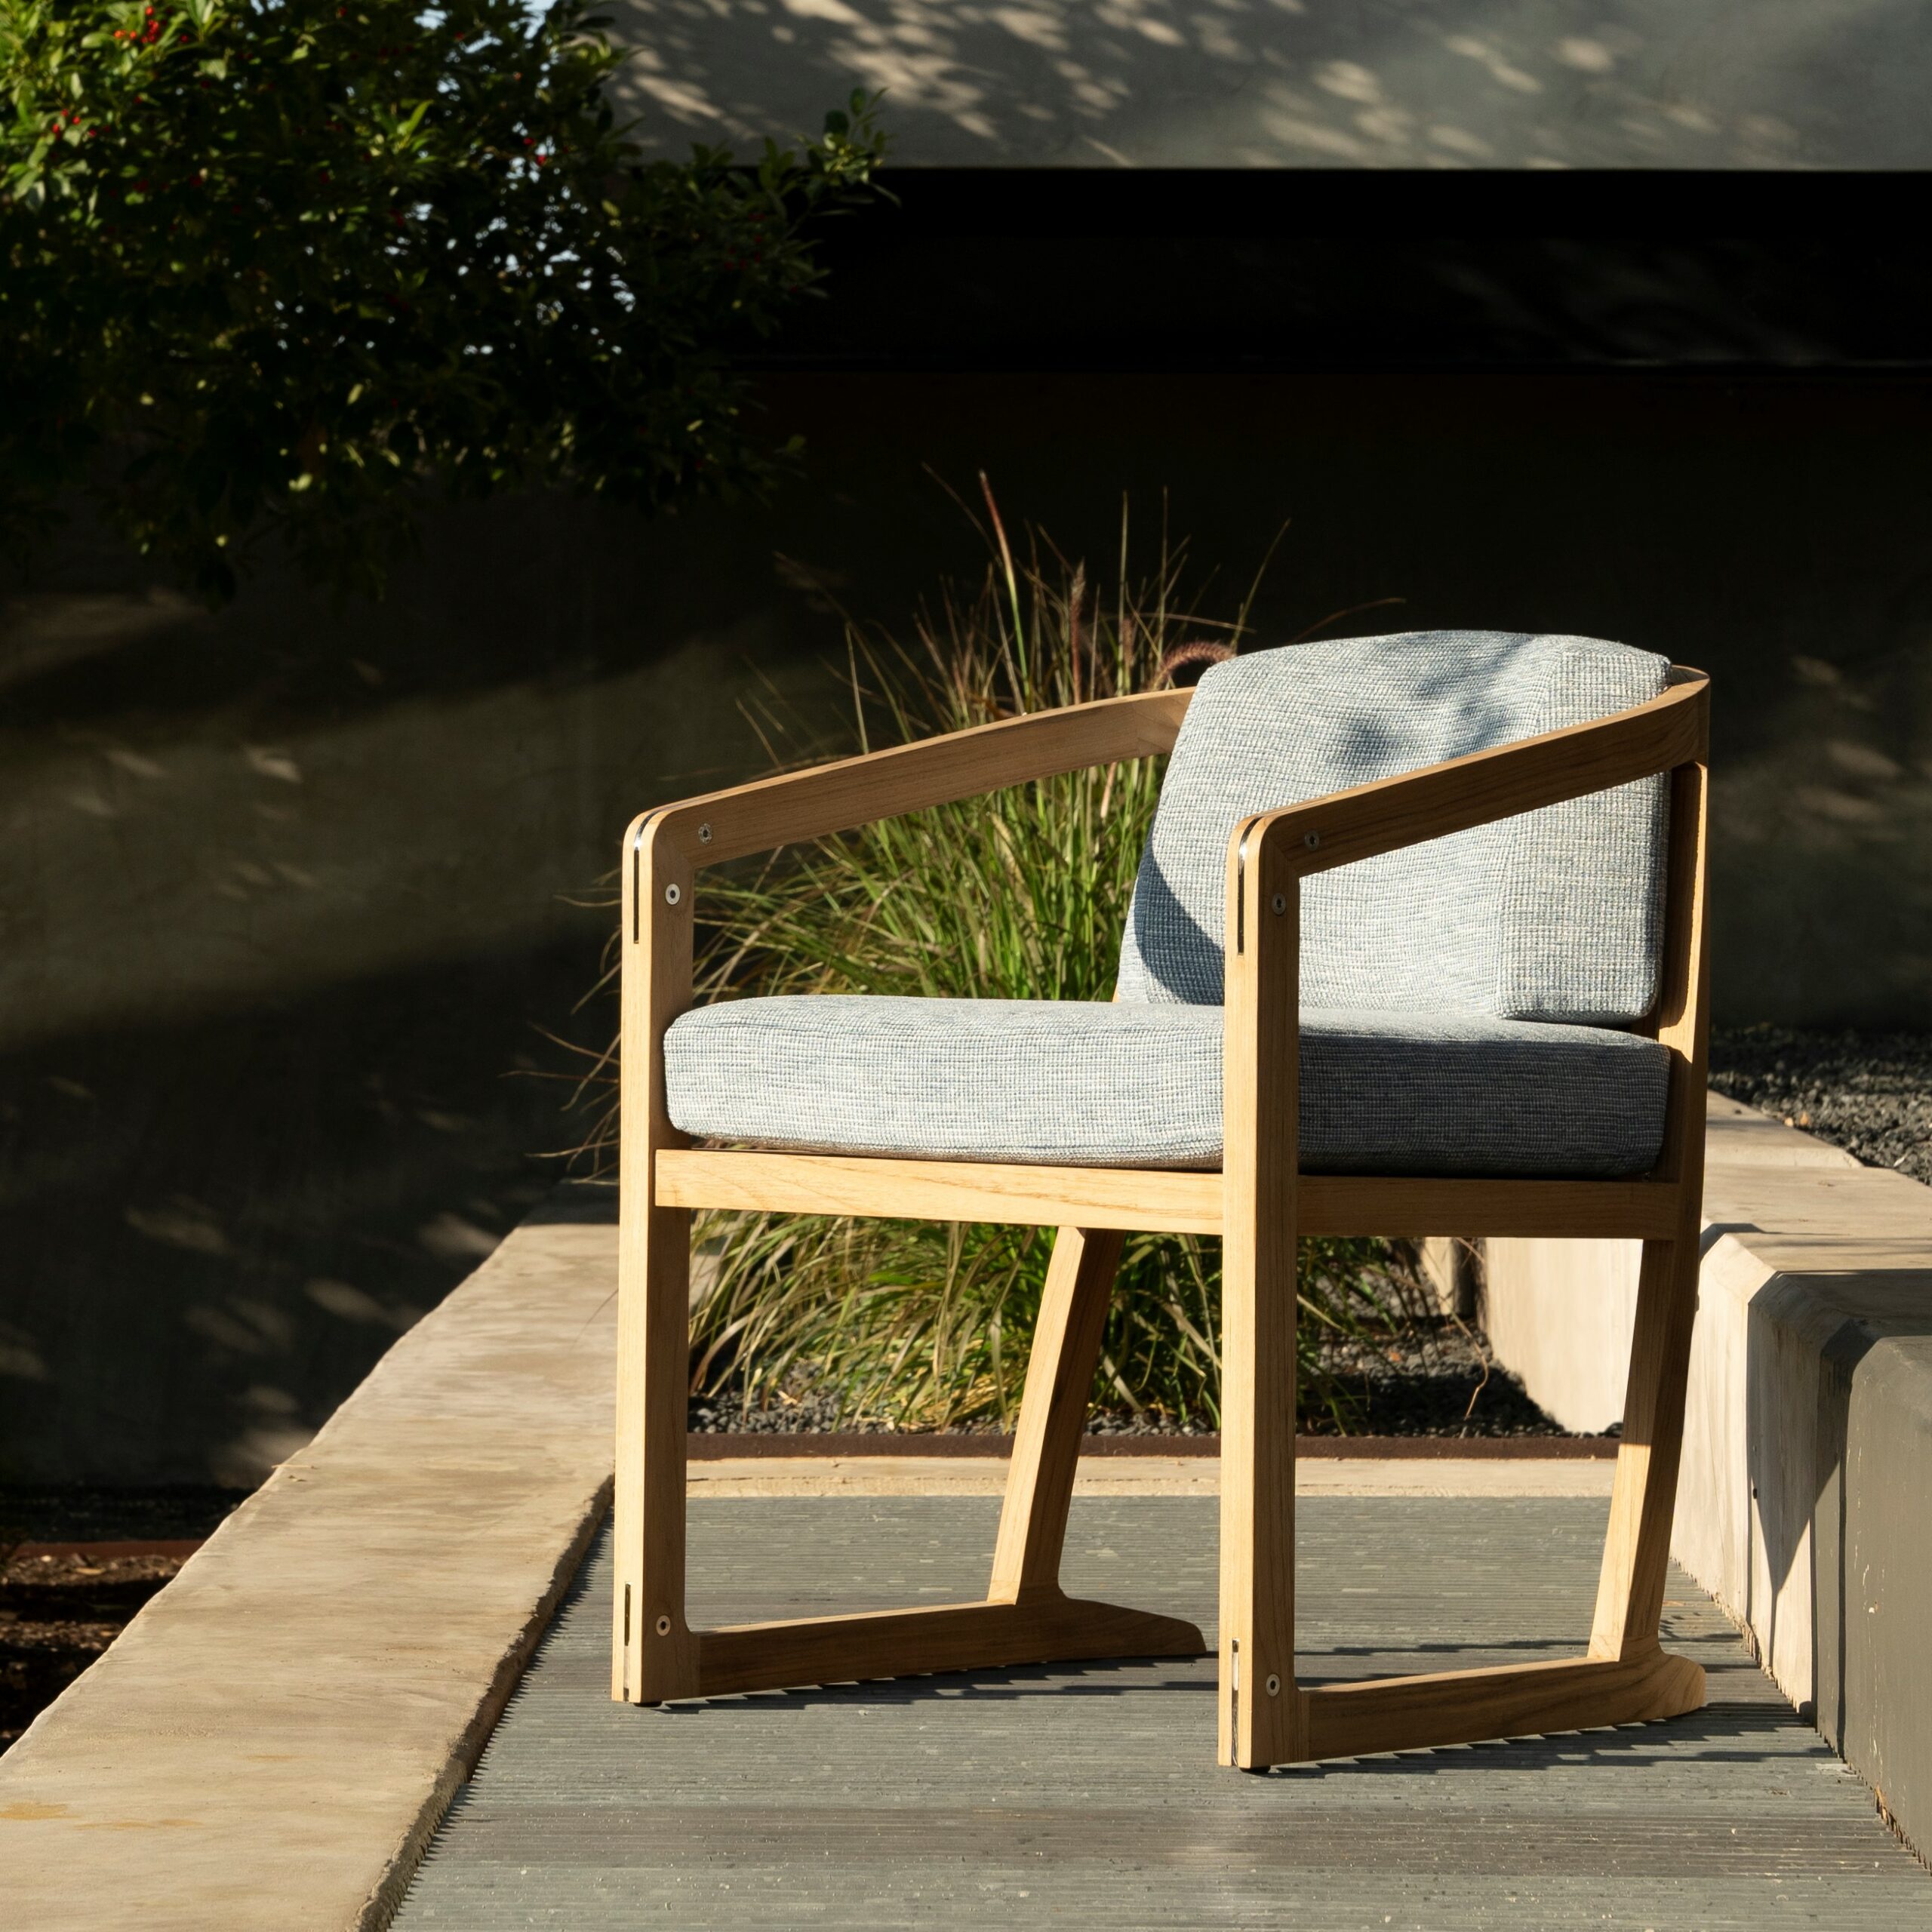 Oceana chair by Sutherland